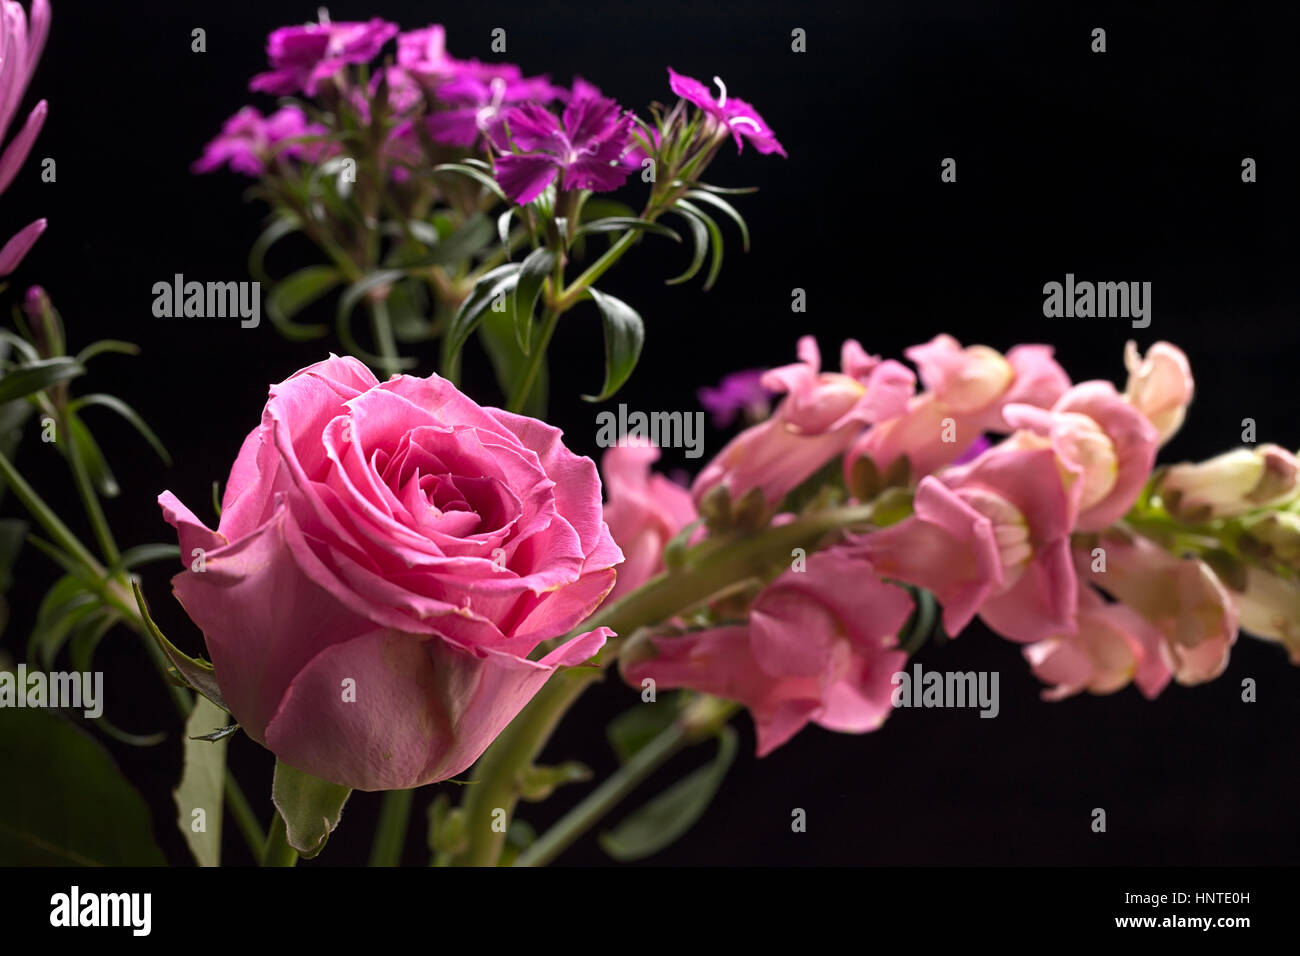 A single pink rose within a small bouquet of flowers. Stock Photo